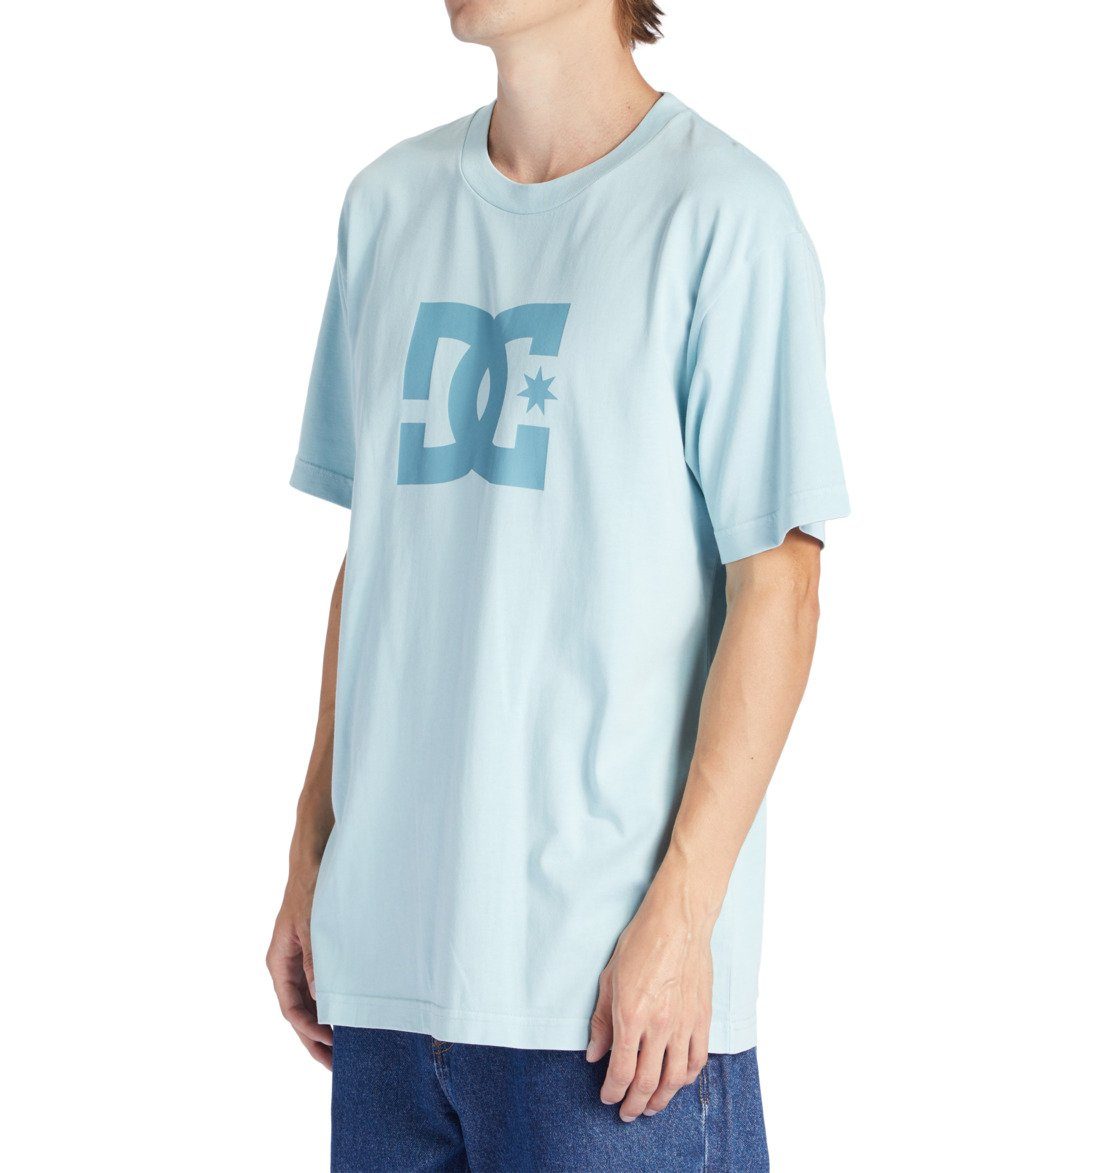 Not Wash T-Shirt Star Pigment DC Dye Enzyme Forget Me DC Shoes